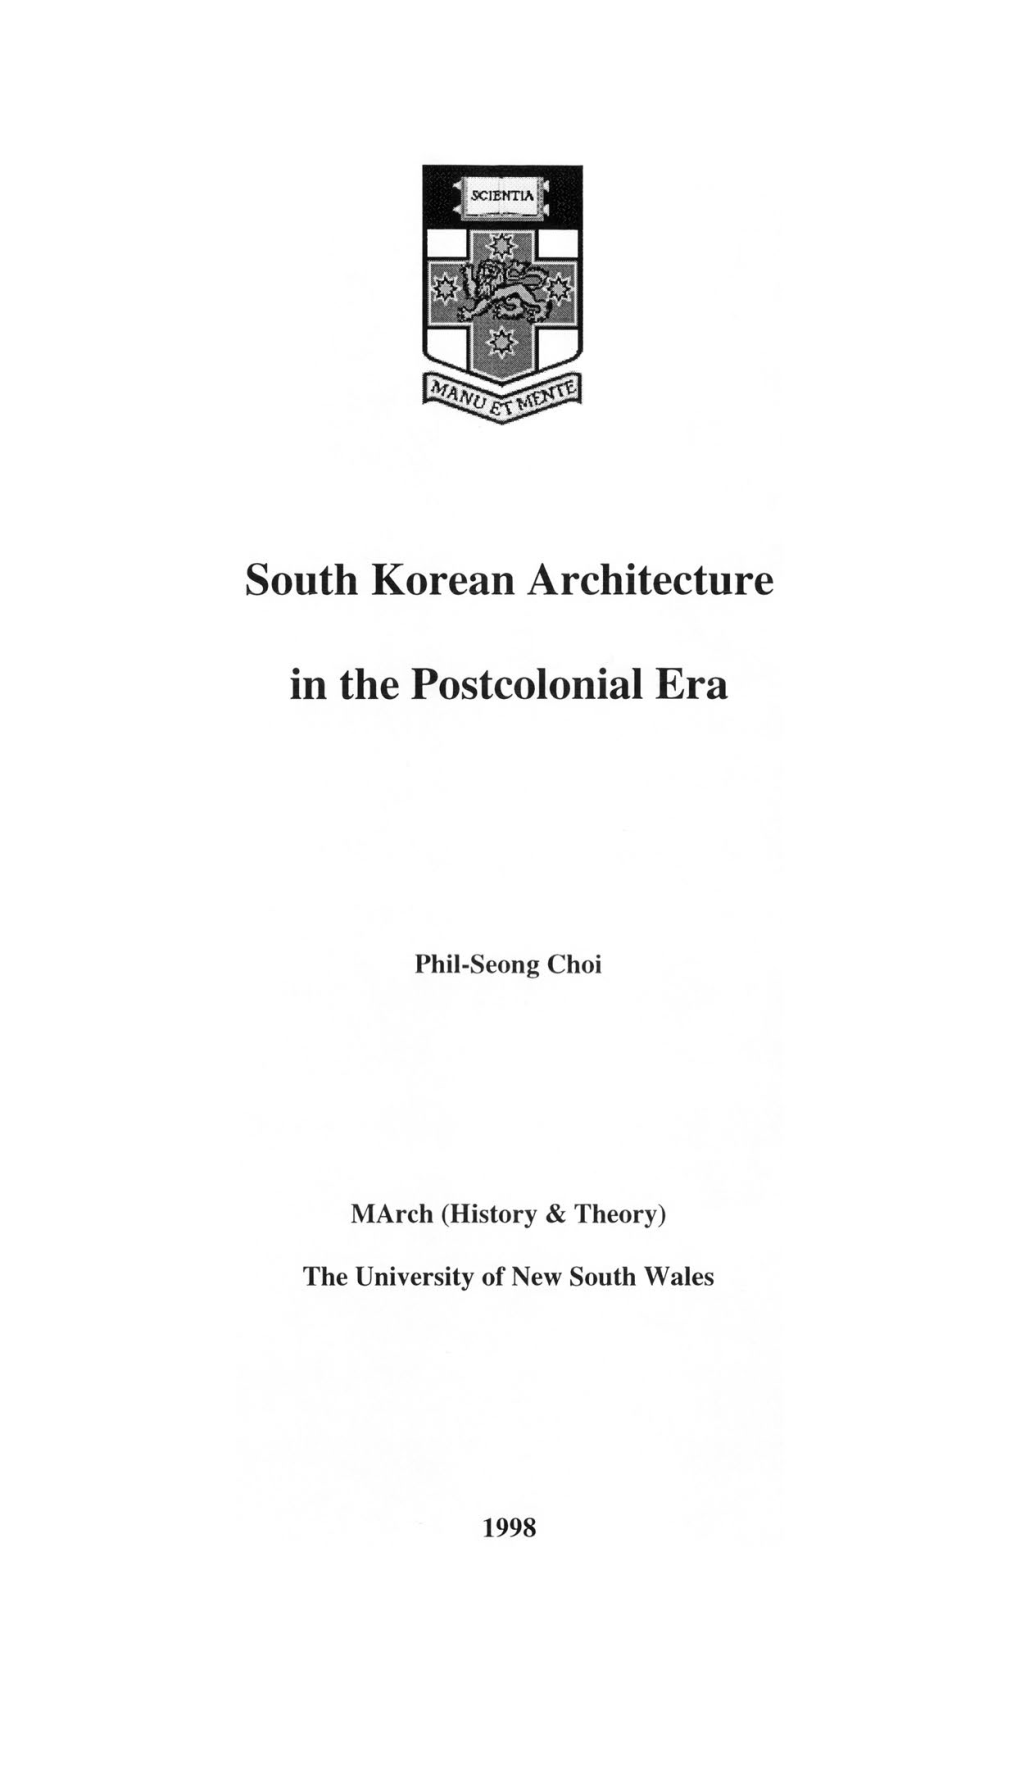 South Korean Architecture in the Postcolonial